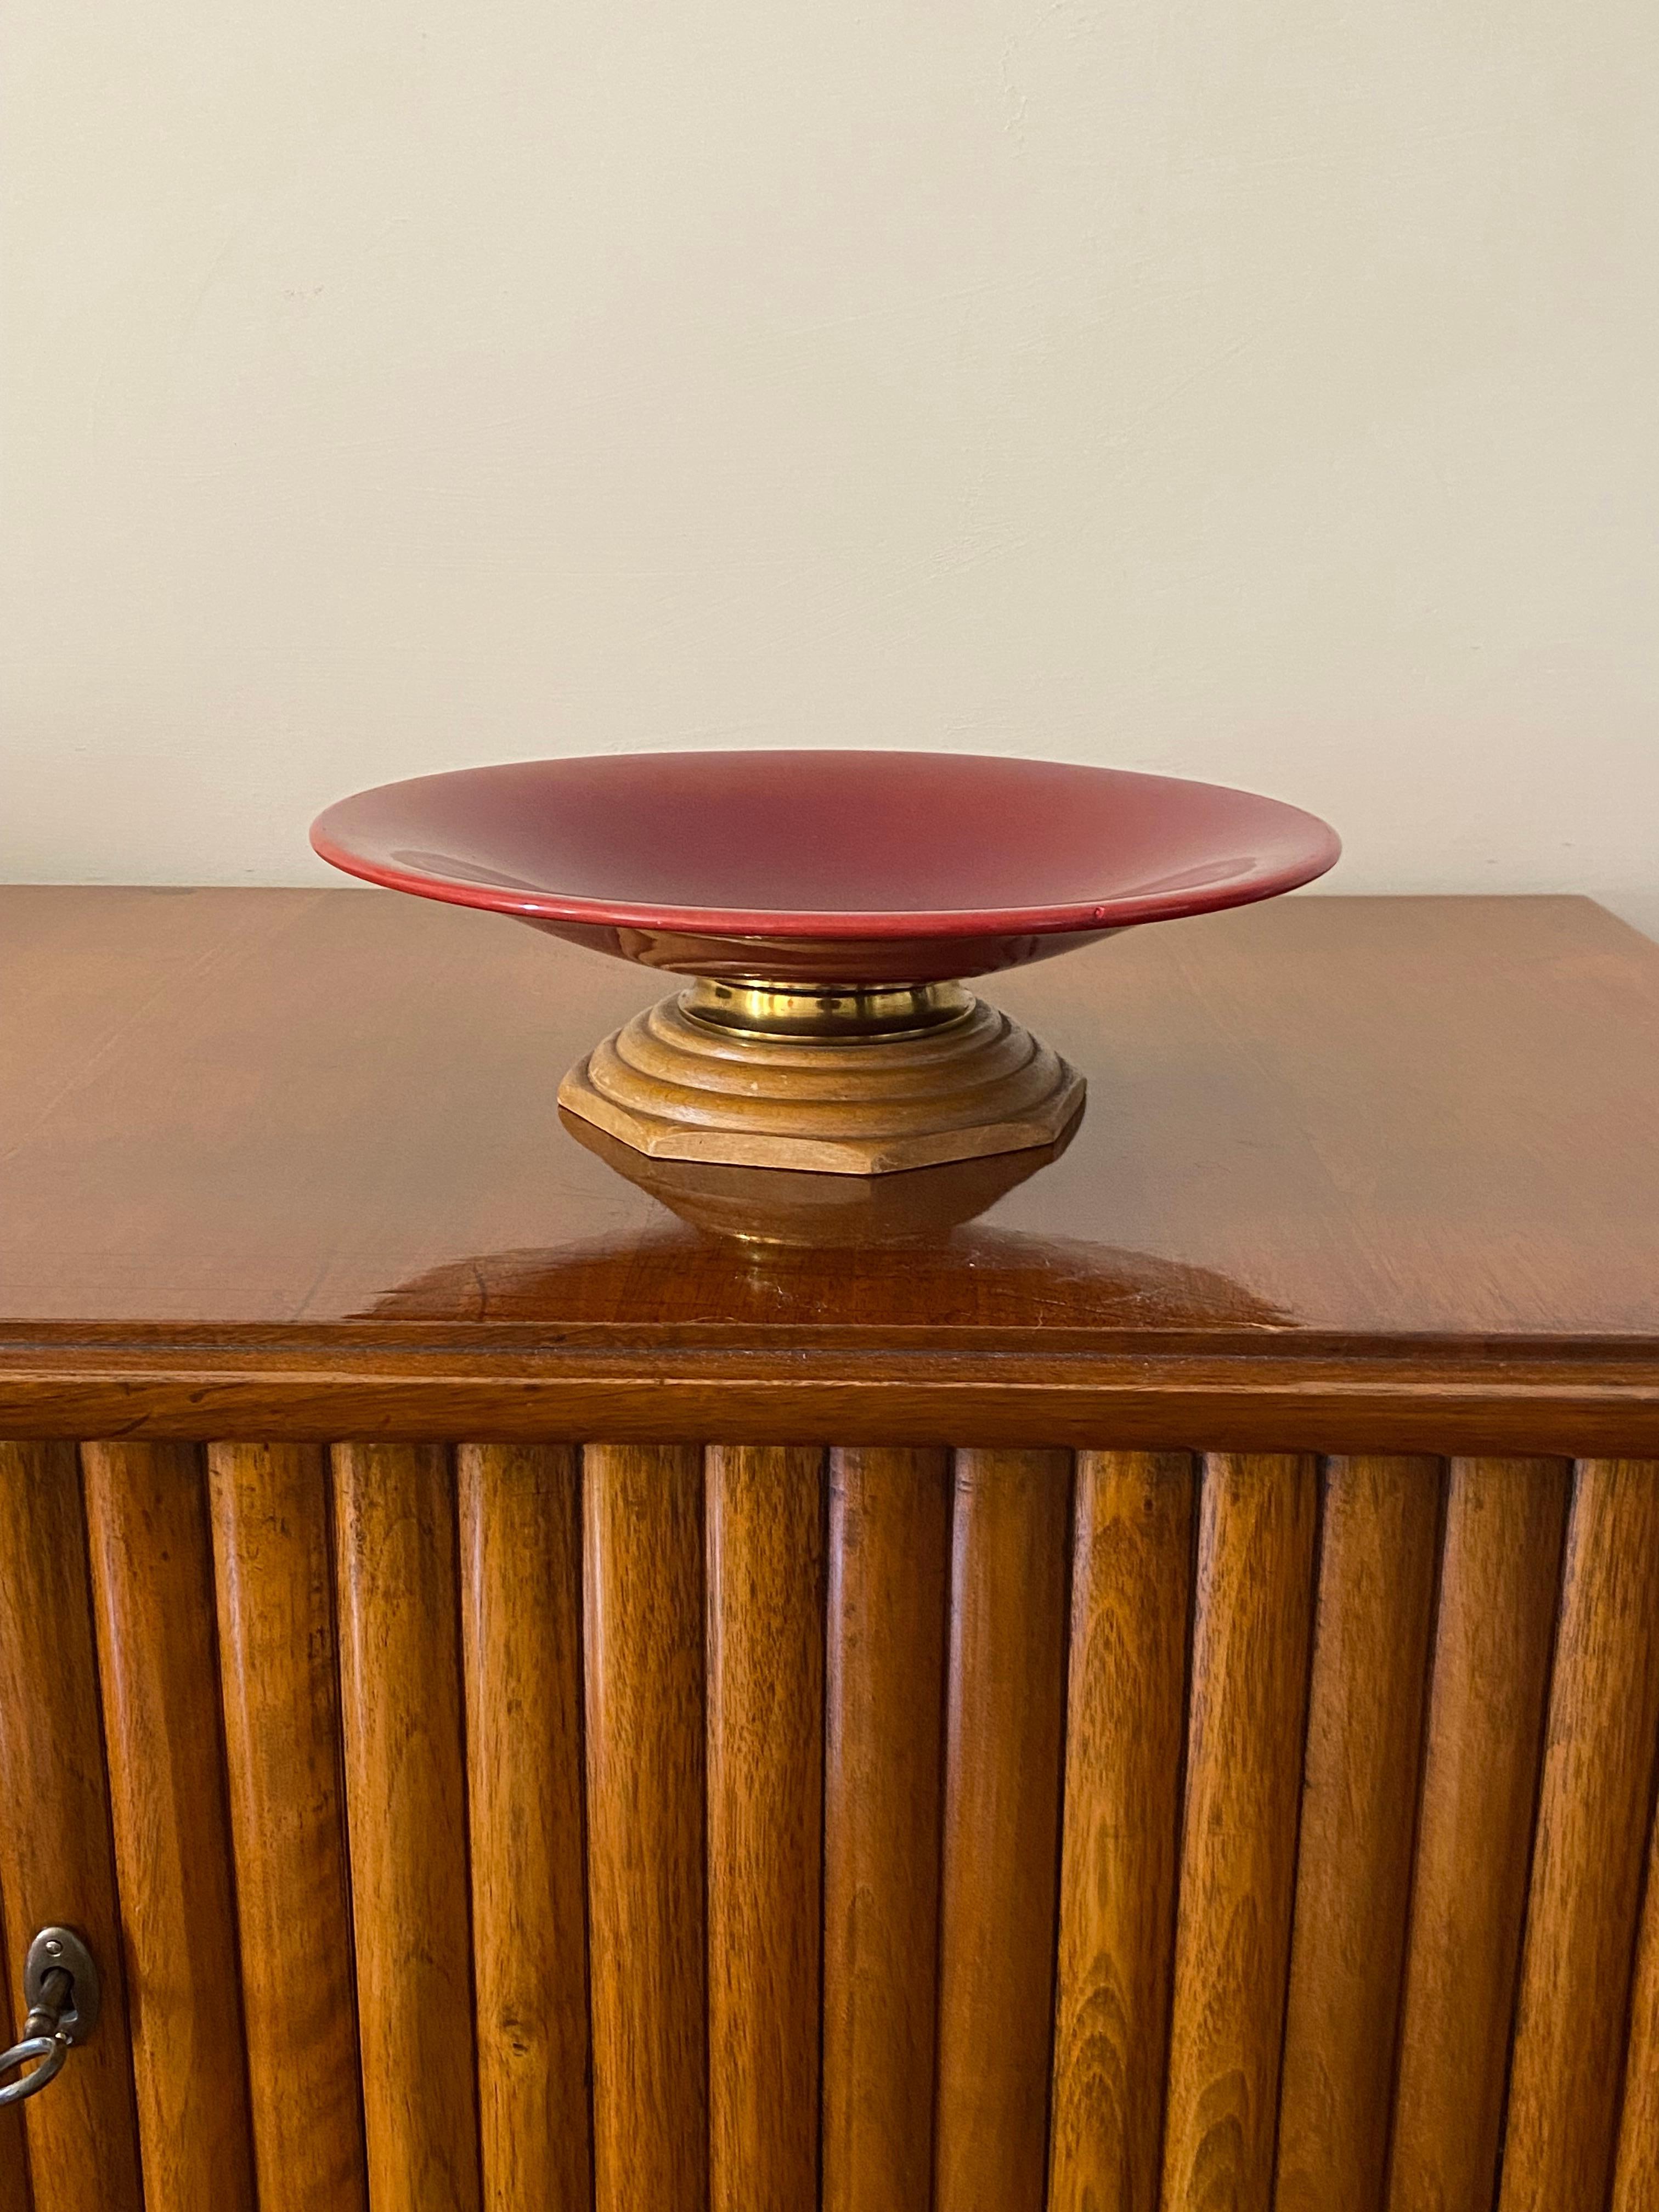 Modern red vide poche / centerpiece

Sevres France, 1940s

Wood, ceramic

Measures: 9 cm Height x 30 cm diameter

Conditions: excellent consistent with age and use.